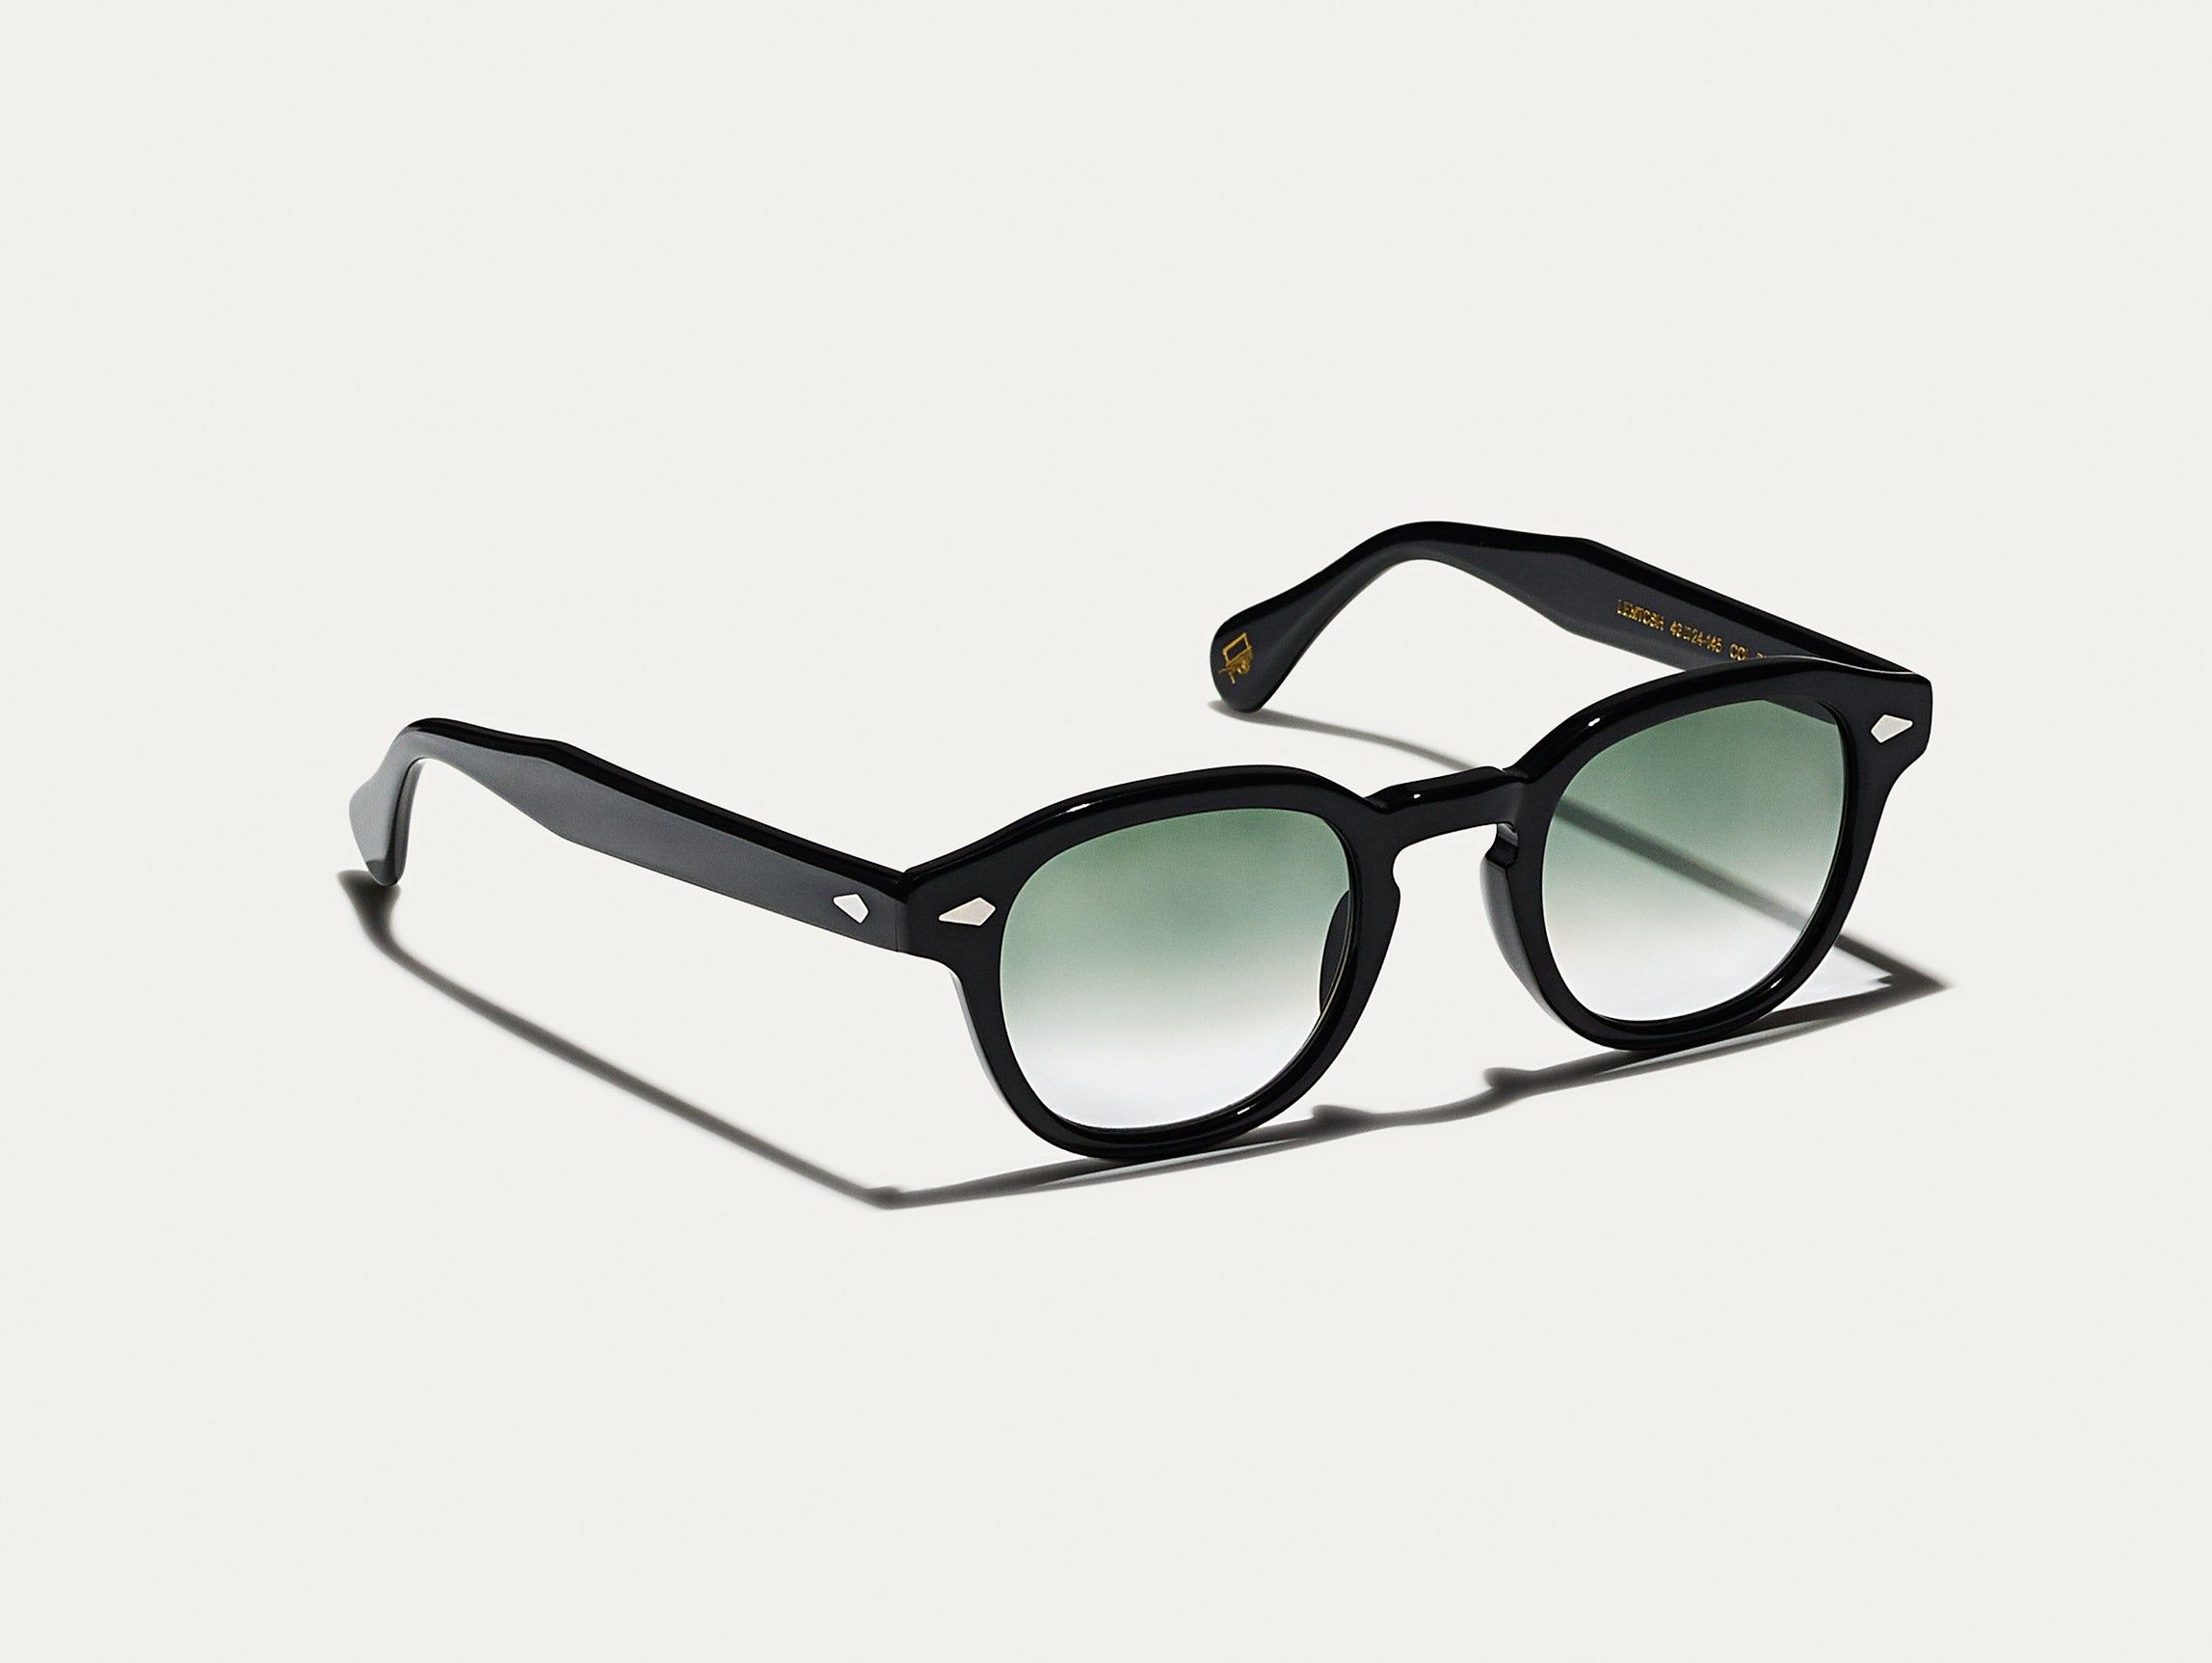 #color_g-15 fade | The LEMTOSH Black with G-15 Fade Tinted Lenses